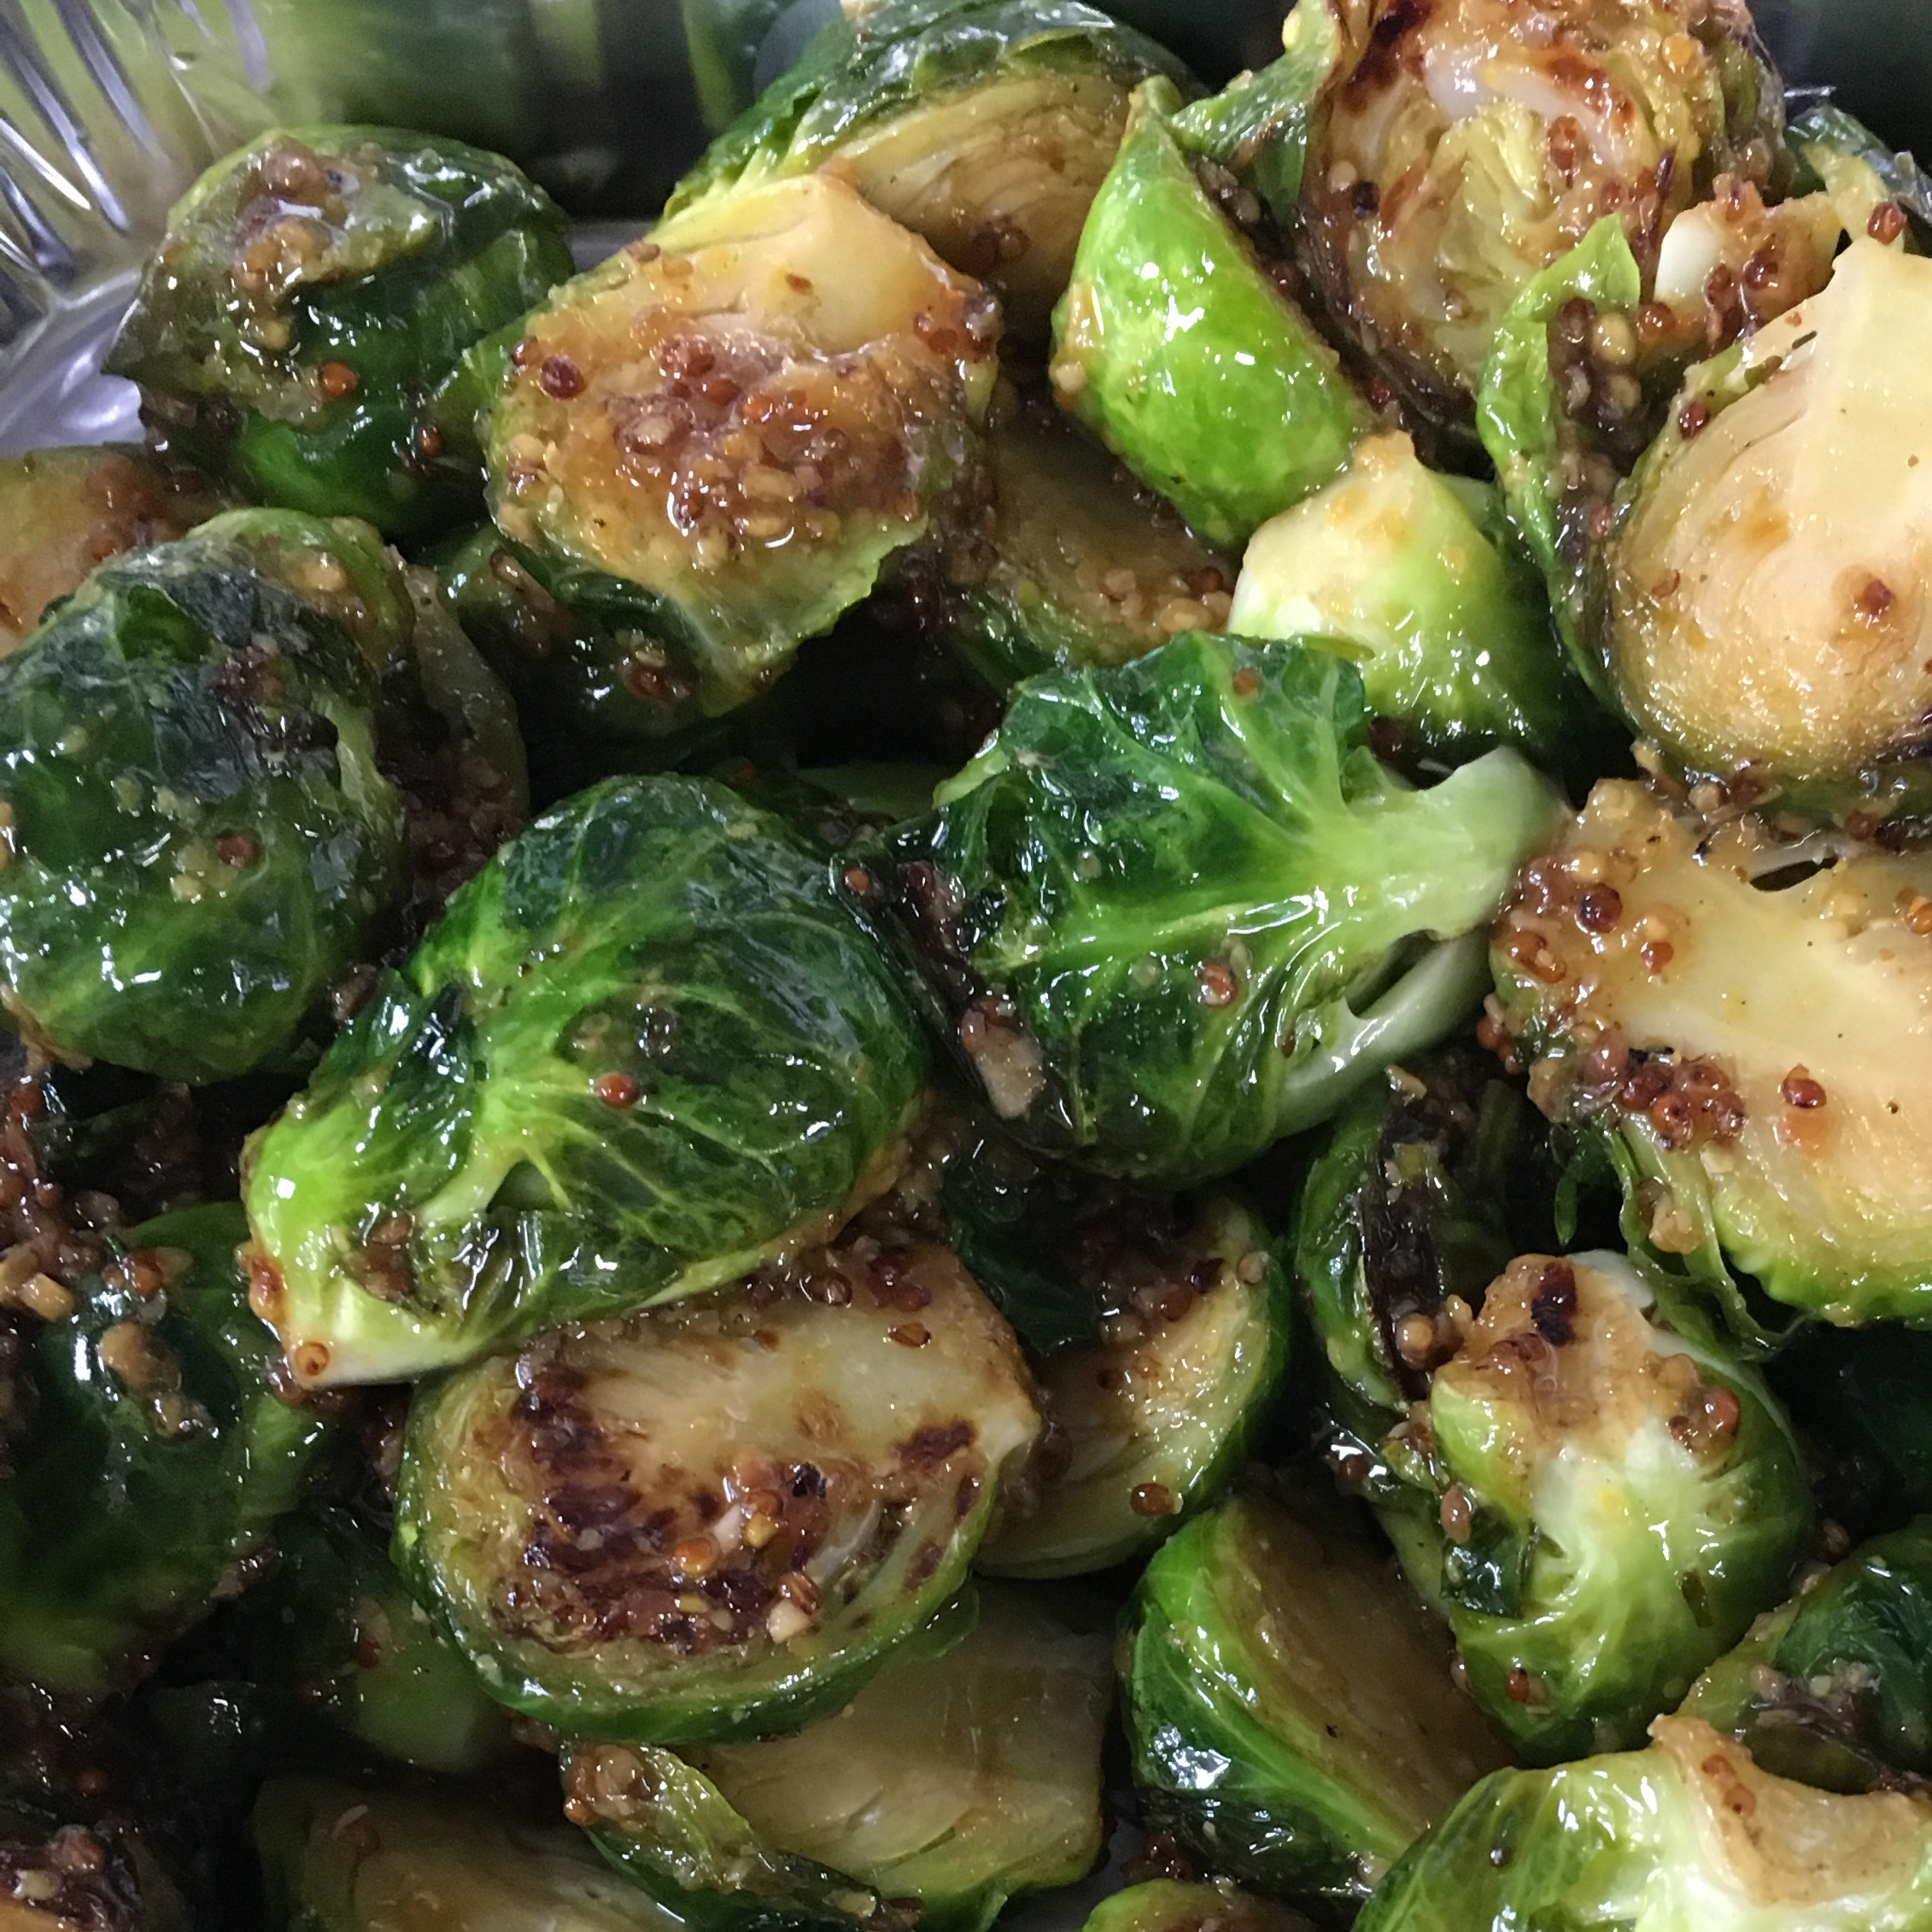 <p>This super quick recipe for steamed Brussels sprouts finishes off the dish with a butter and Dijon mustard sauce sweetened with honey and flavored with dill and onion powder. How good is it? Reviewer Gail Cobile says, "I didn't change anything with this recipe and these are some of the BEST Brussel sprouts I've ever made, bar none!"</p>
                          